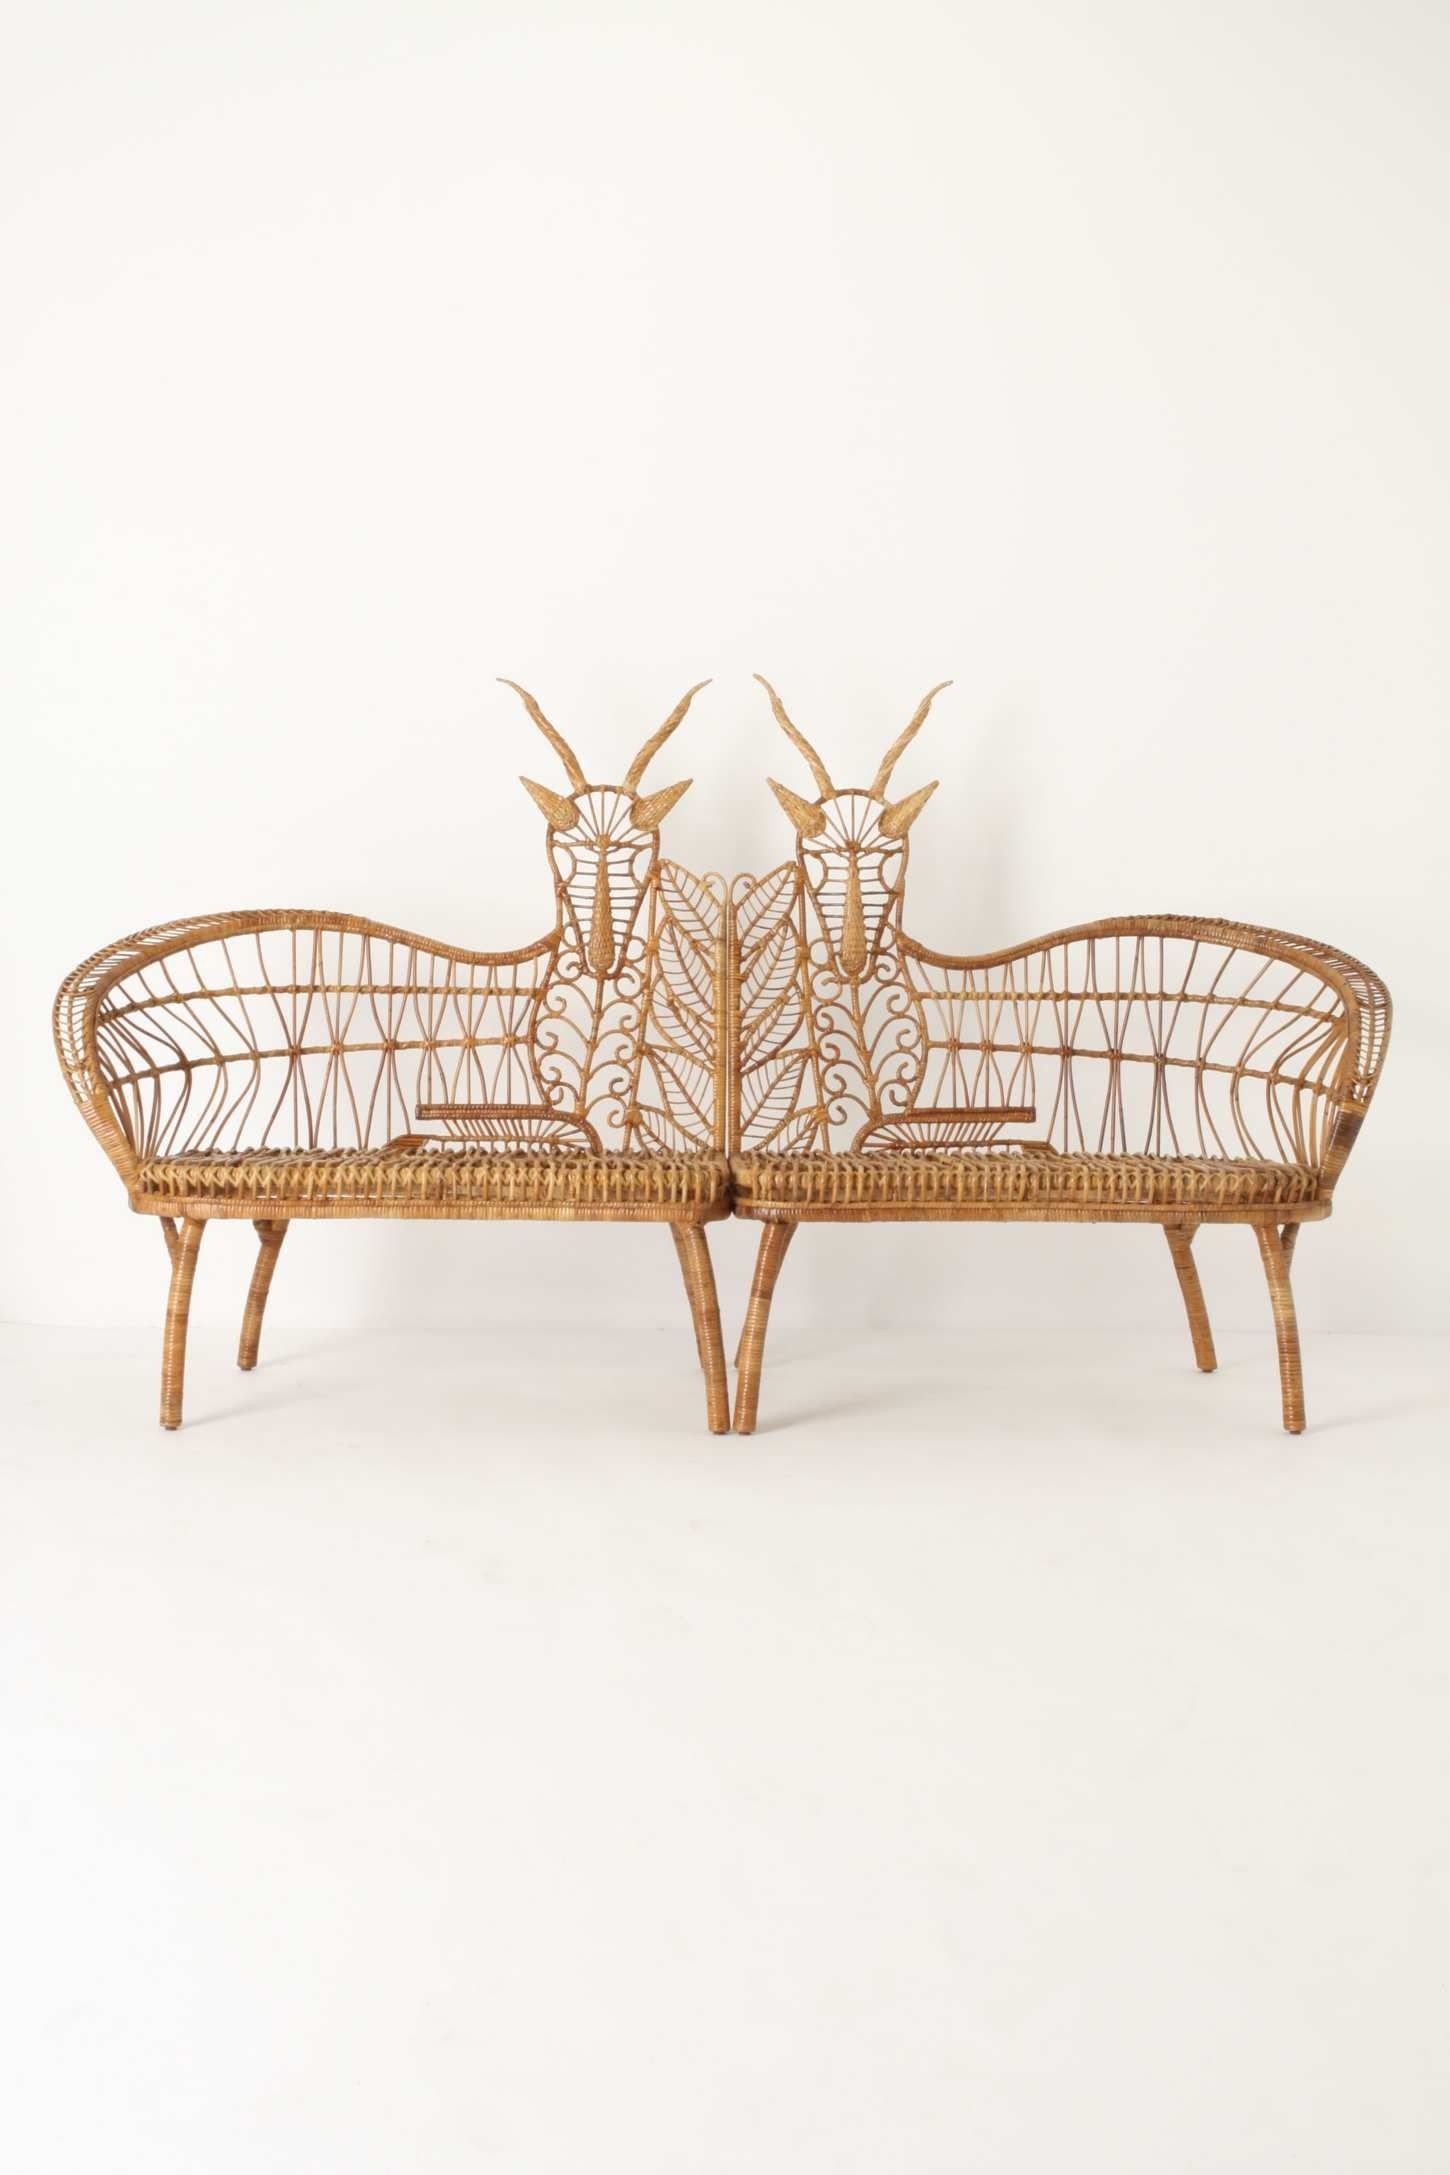 Rattan benches